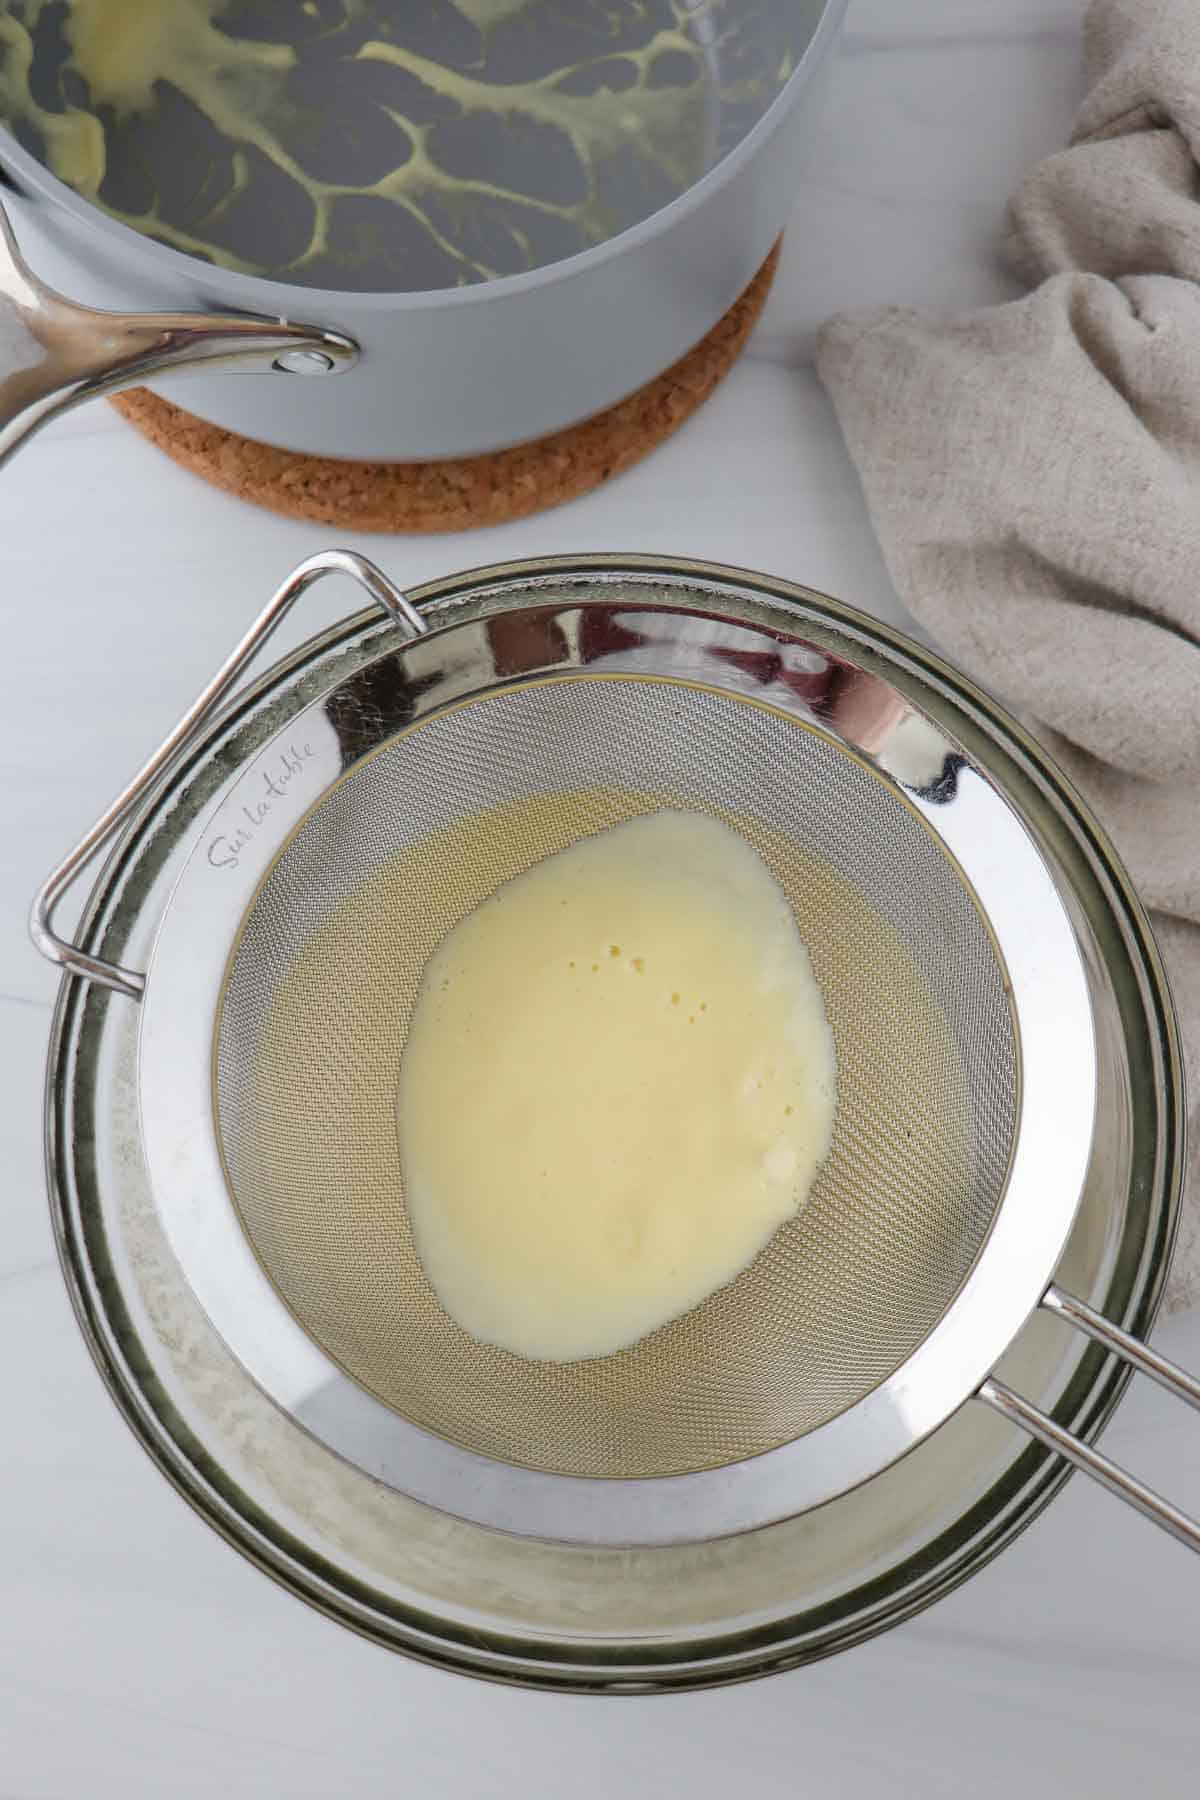 Vanilla sauce in a strainer over a glass bowl.